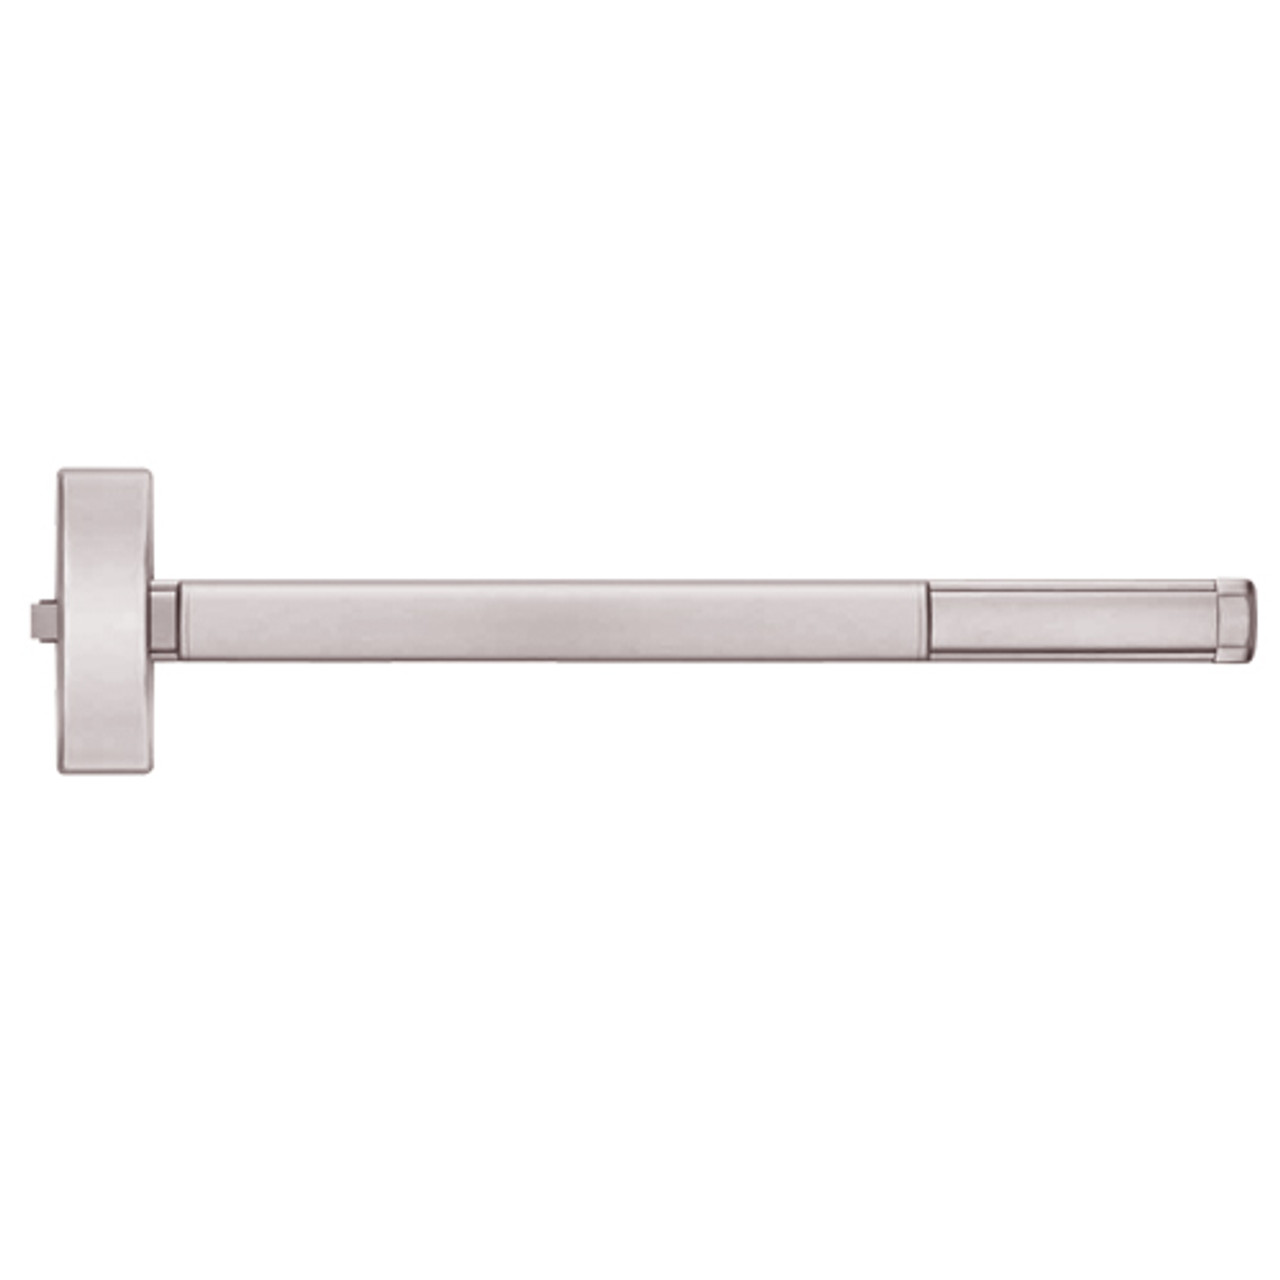 MLR2115-628-48 PHI 2100 Series Non Fire Rated Apex Rim Exit Device with Motorized Latch Retraction Prepped for Thumb Piece Always Active in Satin Aluminum Finish